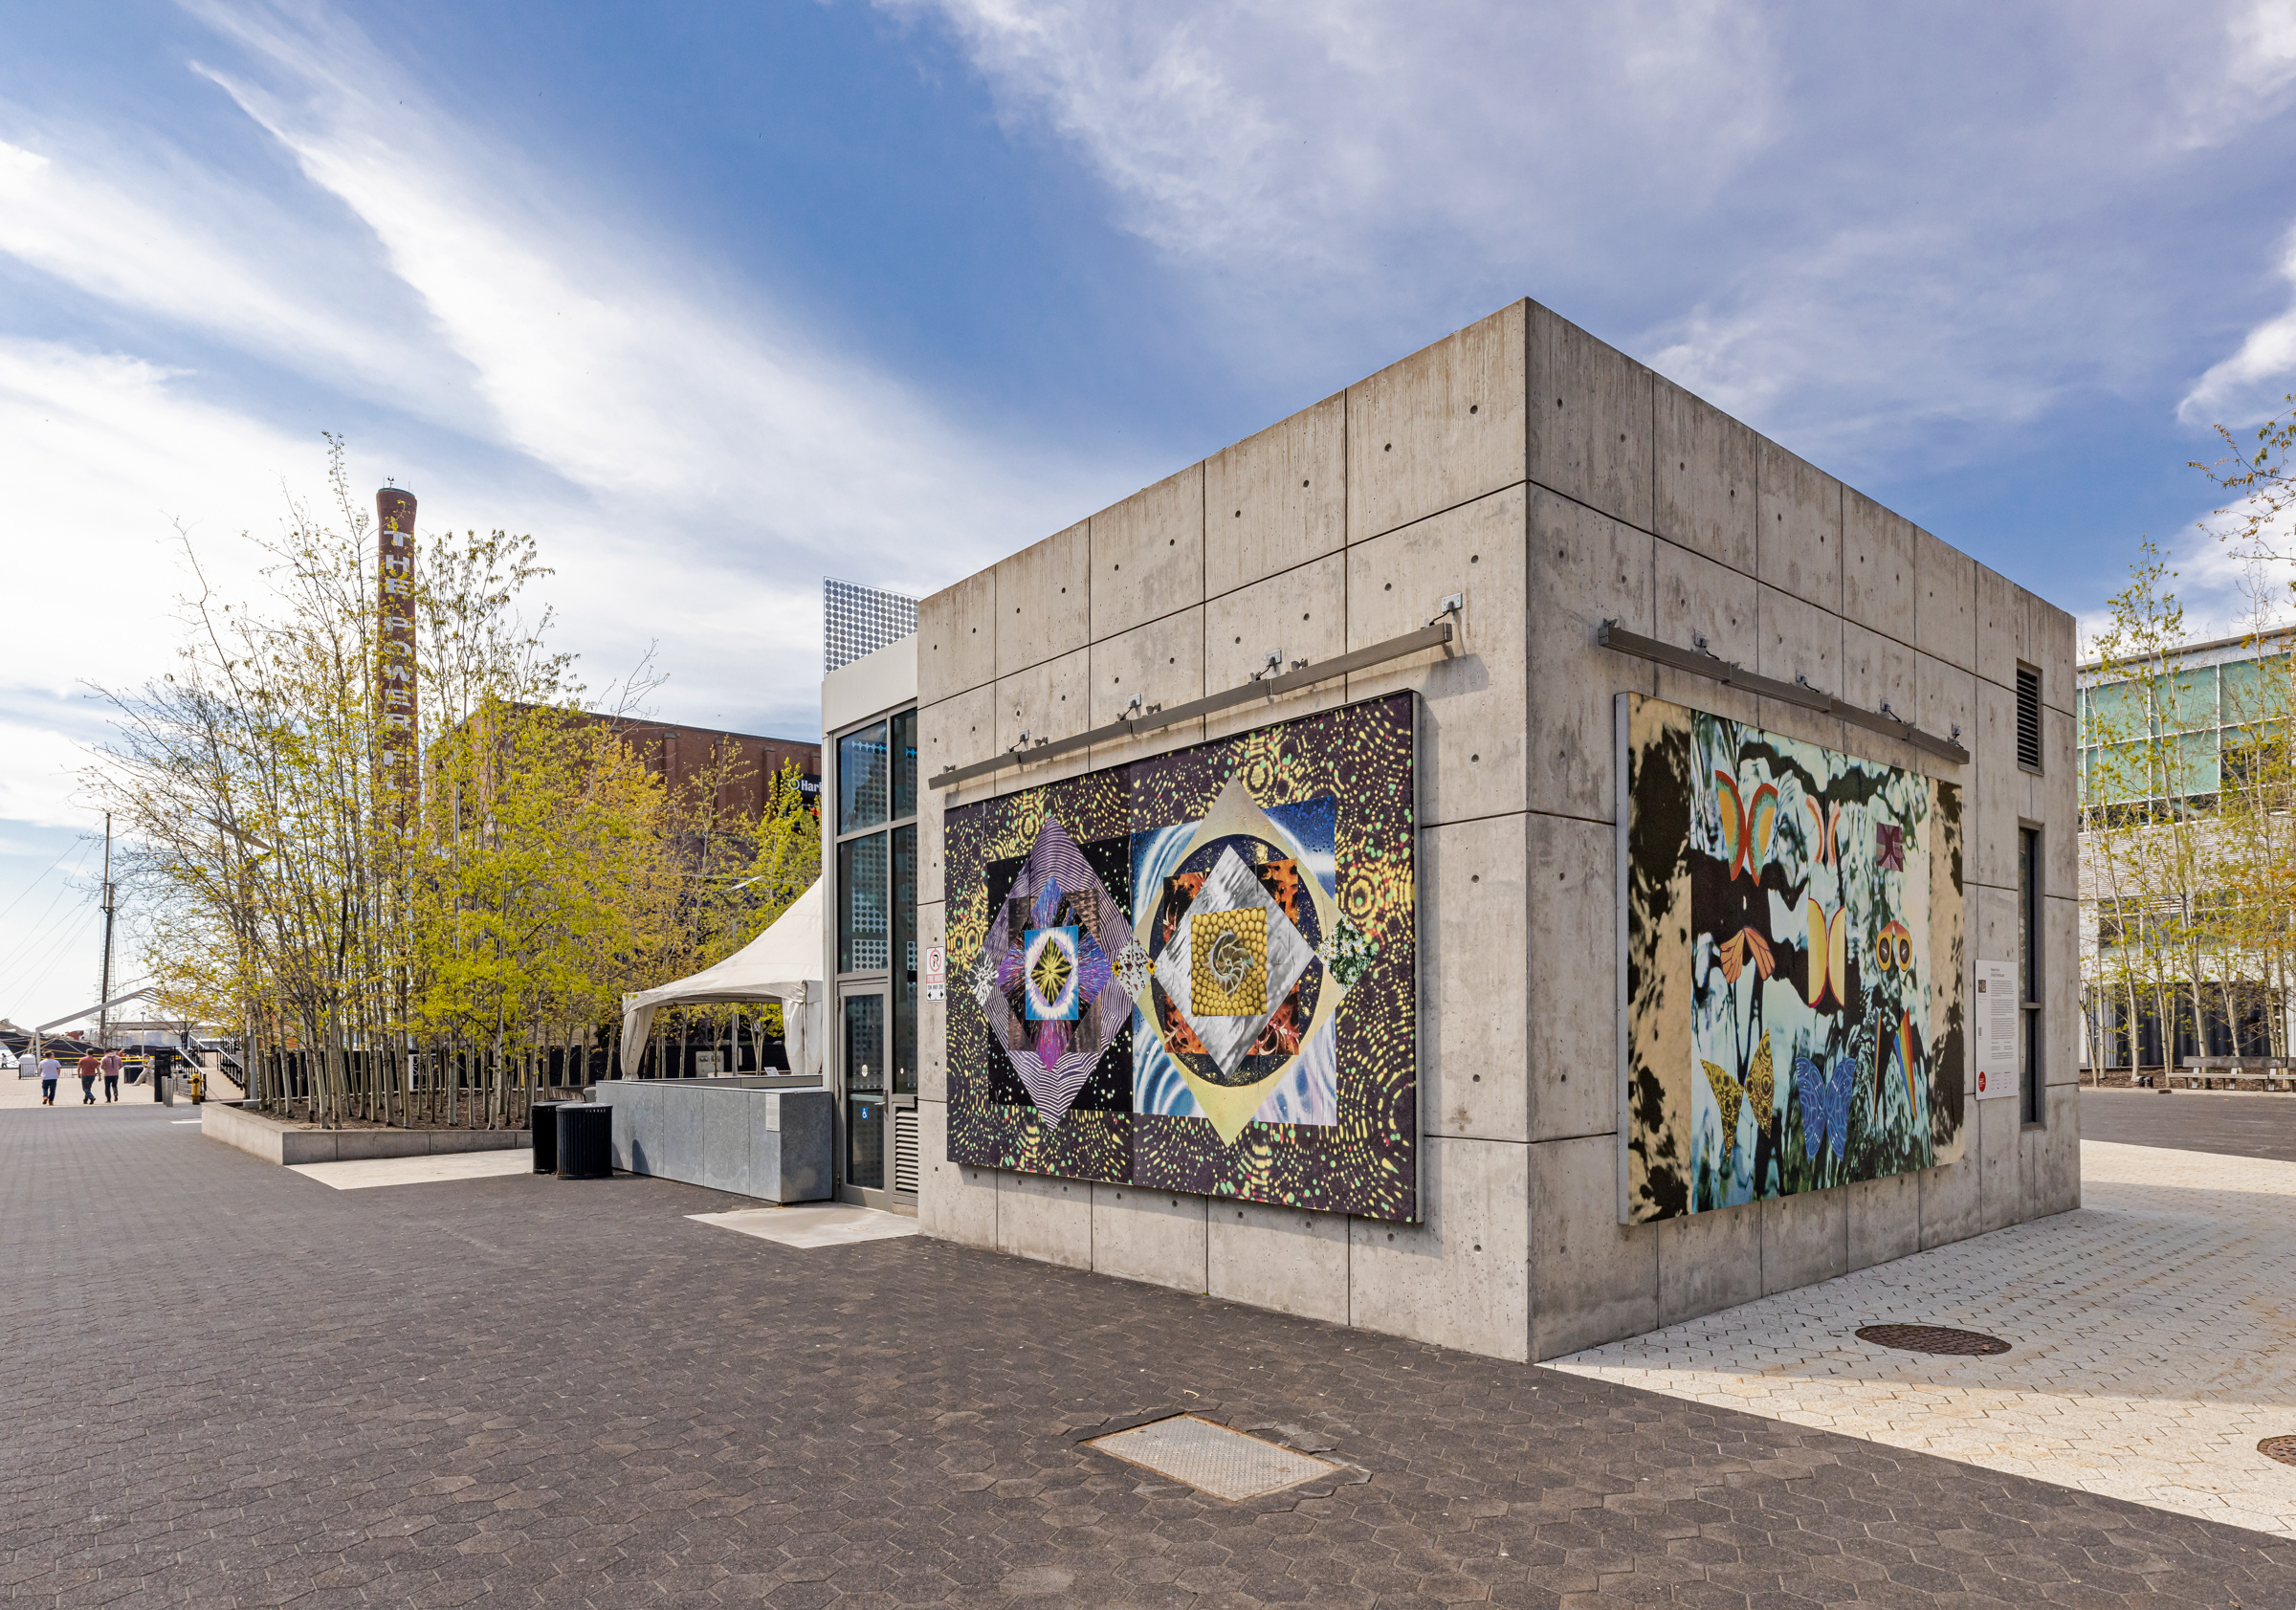     Maggie Groat, DOUBLE PENDULUM, 2023, installation view, wheat-pasted images at Harbourfront Centre parking pavilion, Toronto. Courtesy of the artist and Scotiabank CONTACT Photography Festival. Photo: Toni Hafkenscheid

